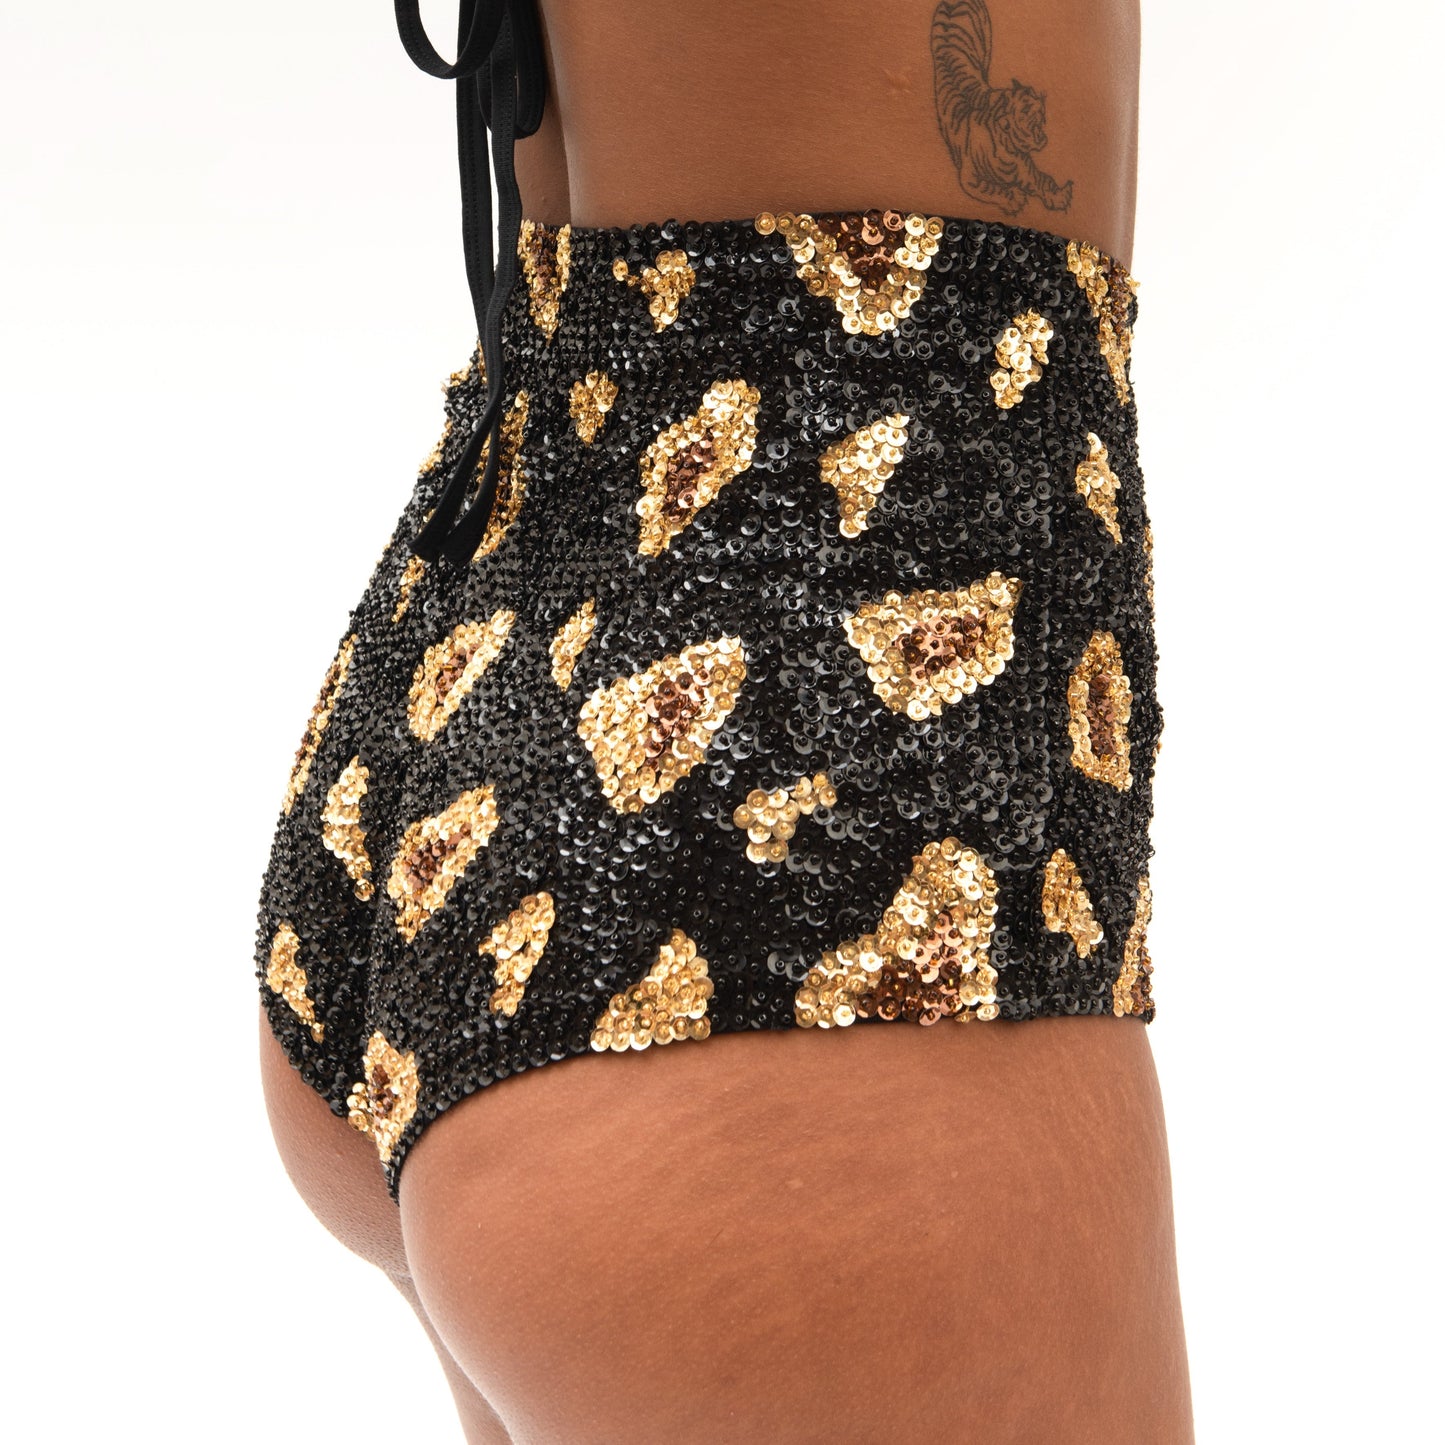 hand made sequin shorts in gold and black leopard print design for festival outfits